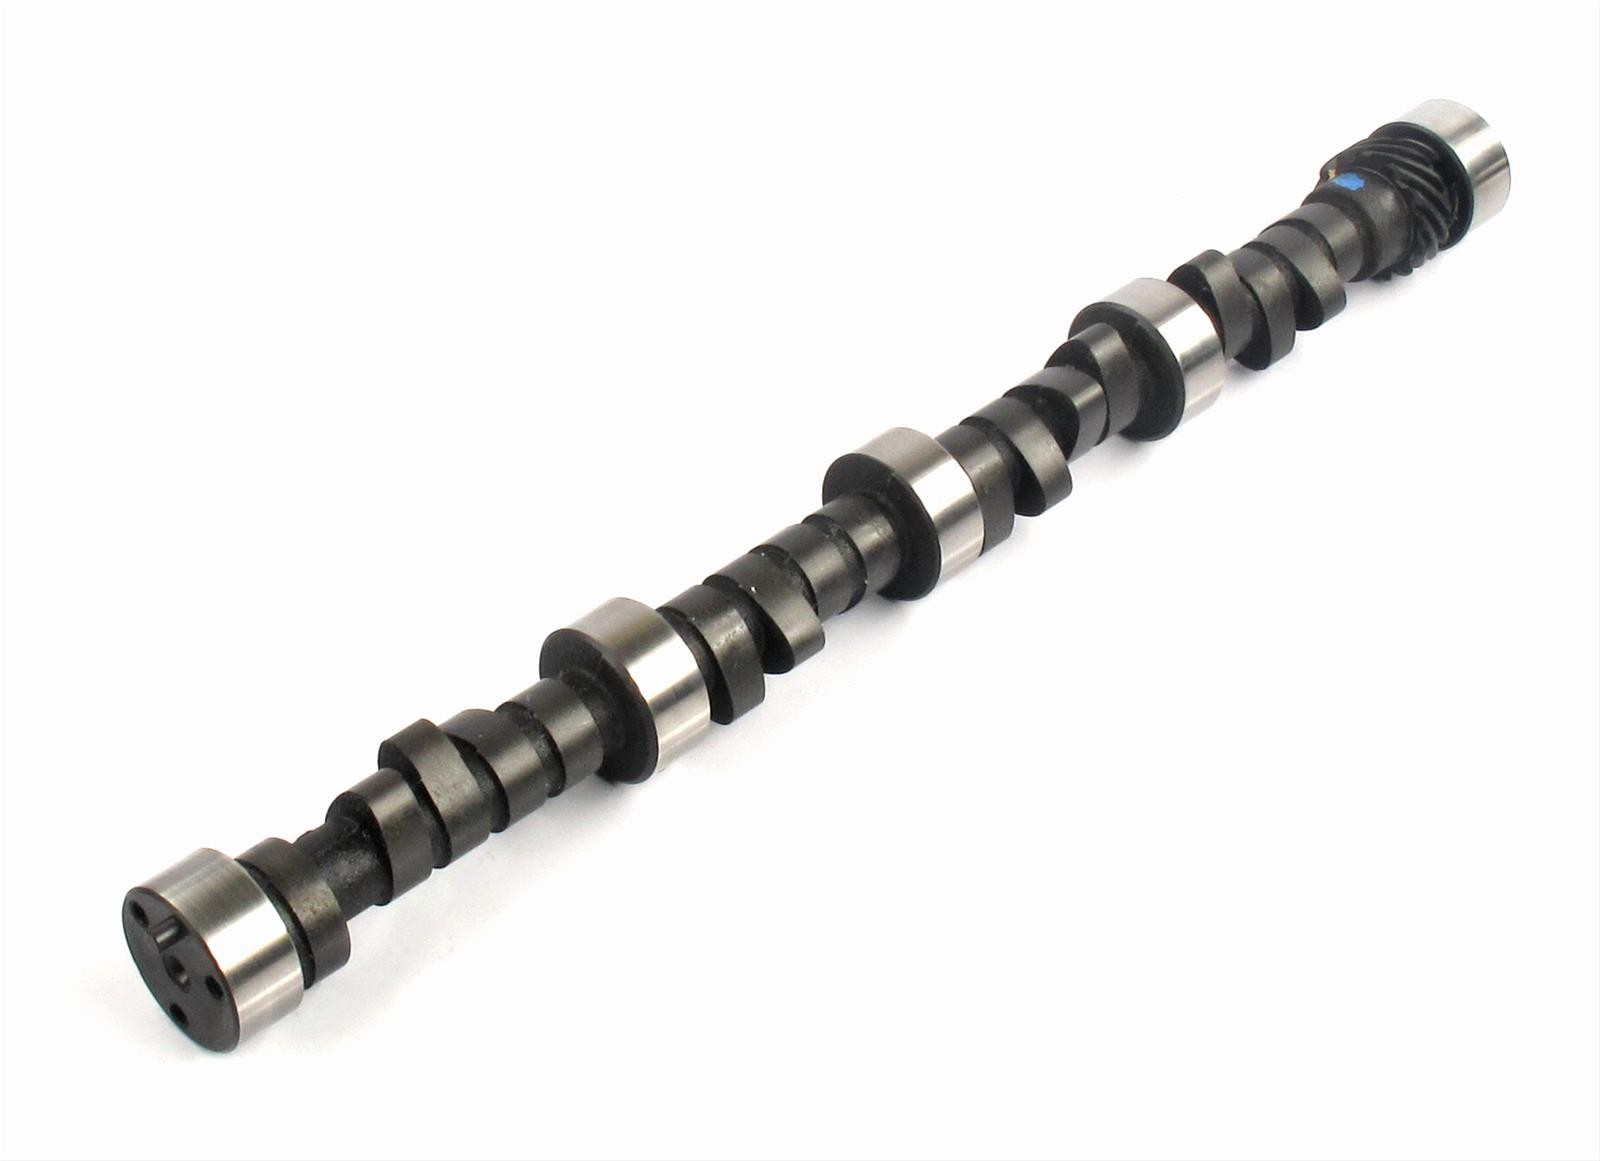 Replacement Hydraulic Camshaft (stage 1) : suit Small Block